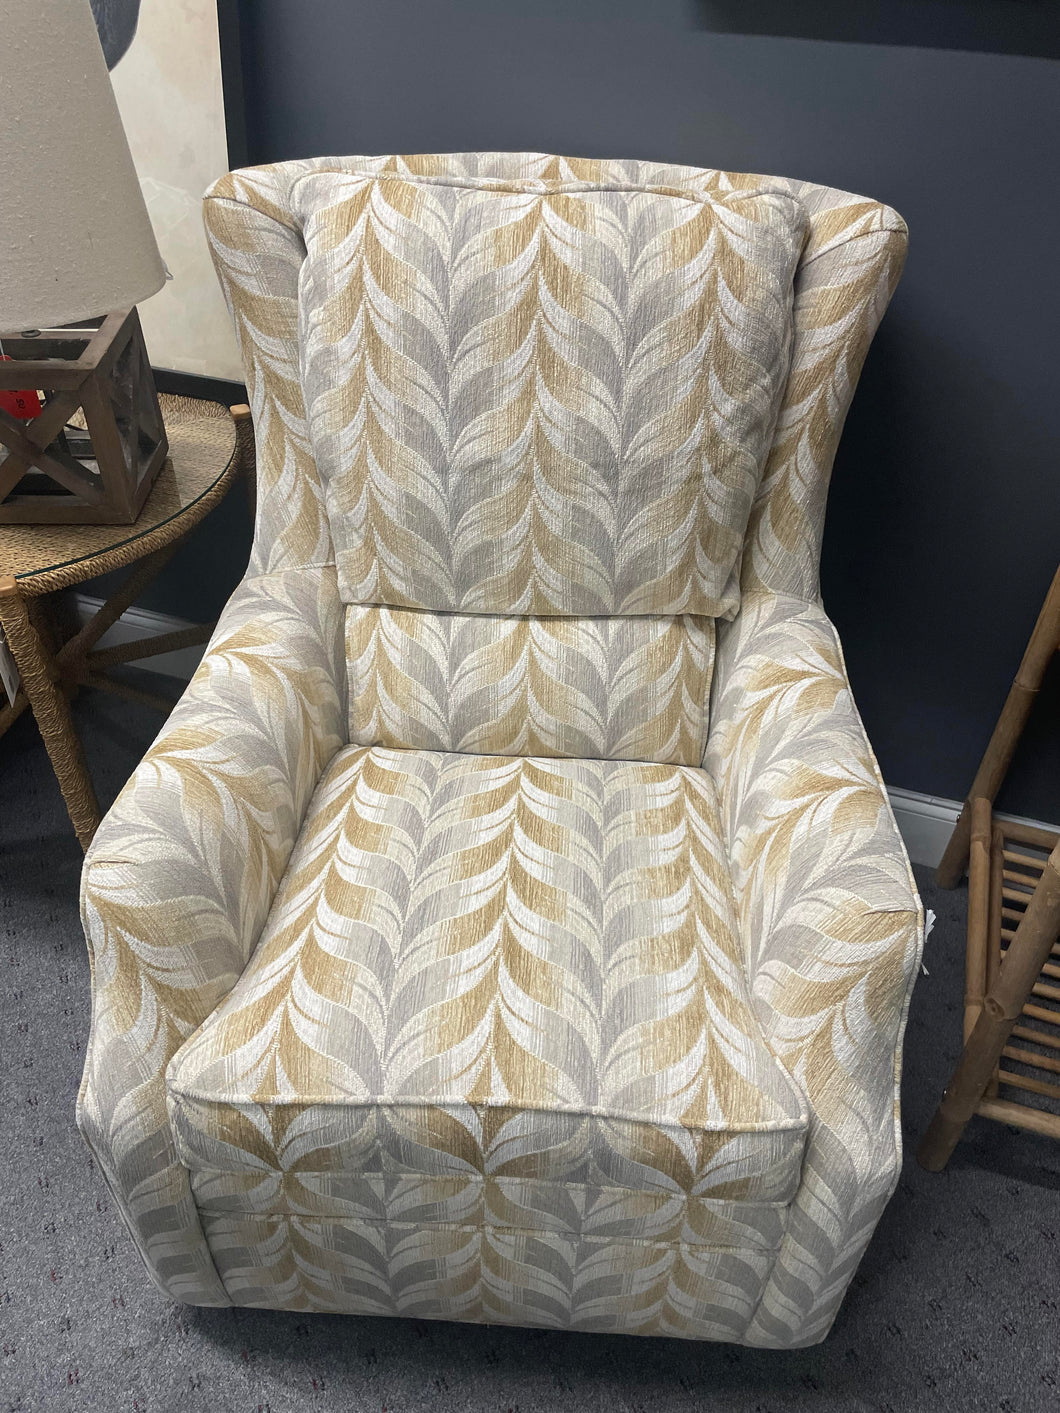 King Hickory Writer Swivel Chair in Kyland Pear